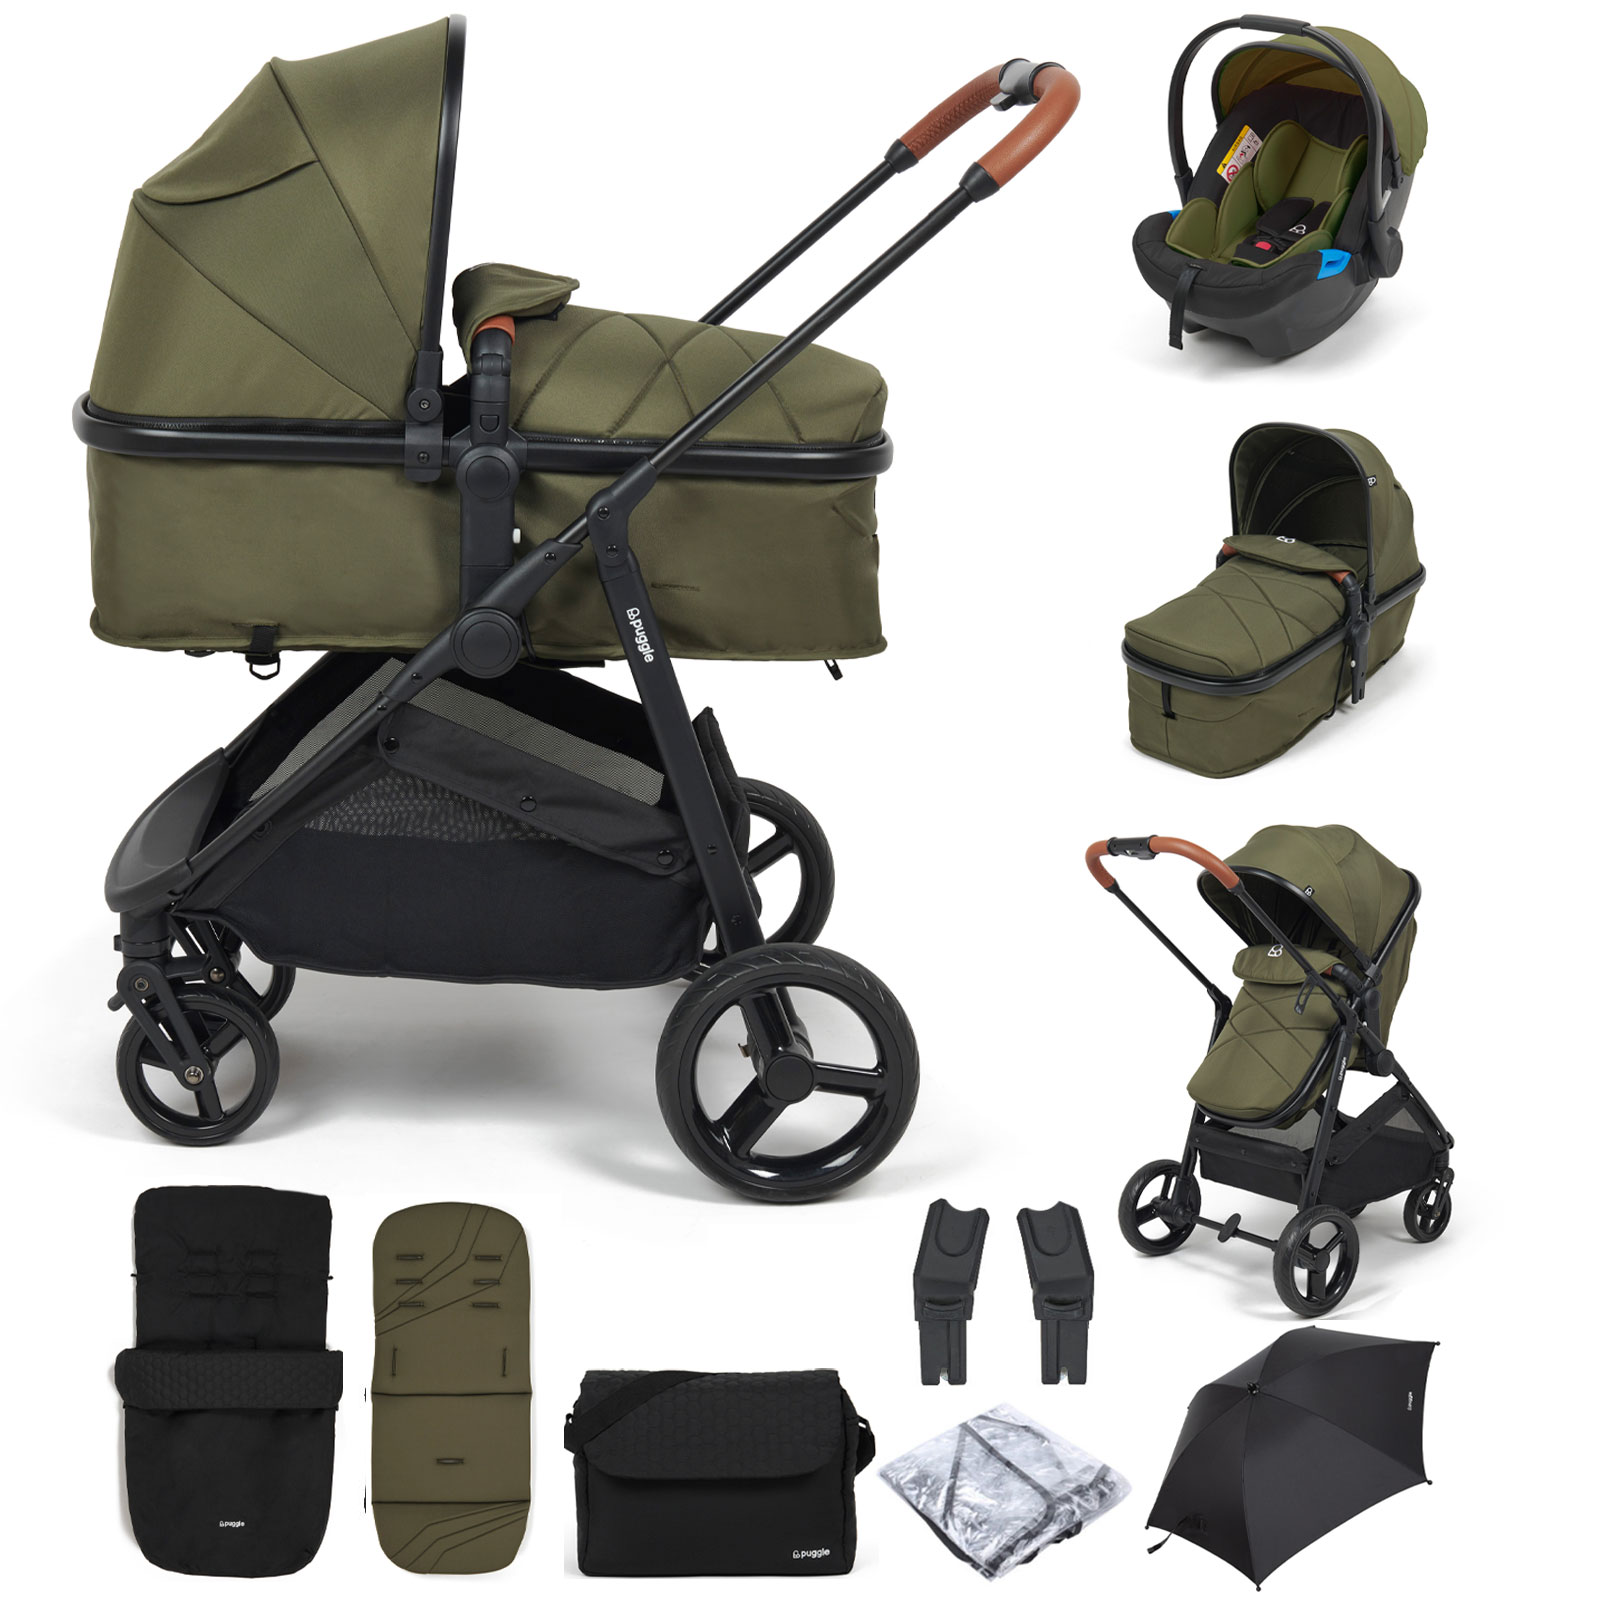 Puggle Monaco XT 2in1 Pram Pushchair Travel System with Parasol, Footmuff & Bag - Forest Green